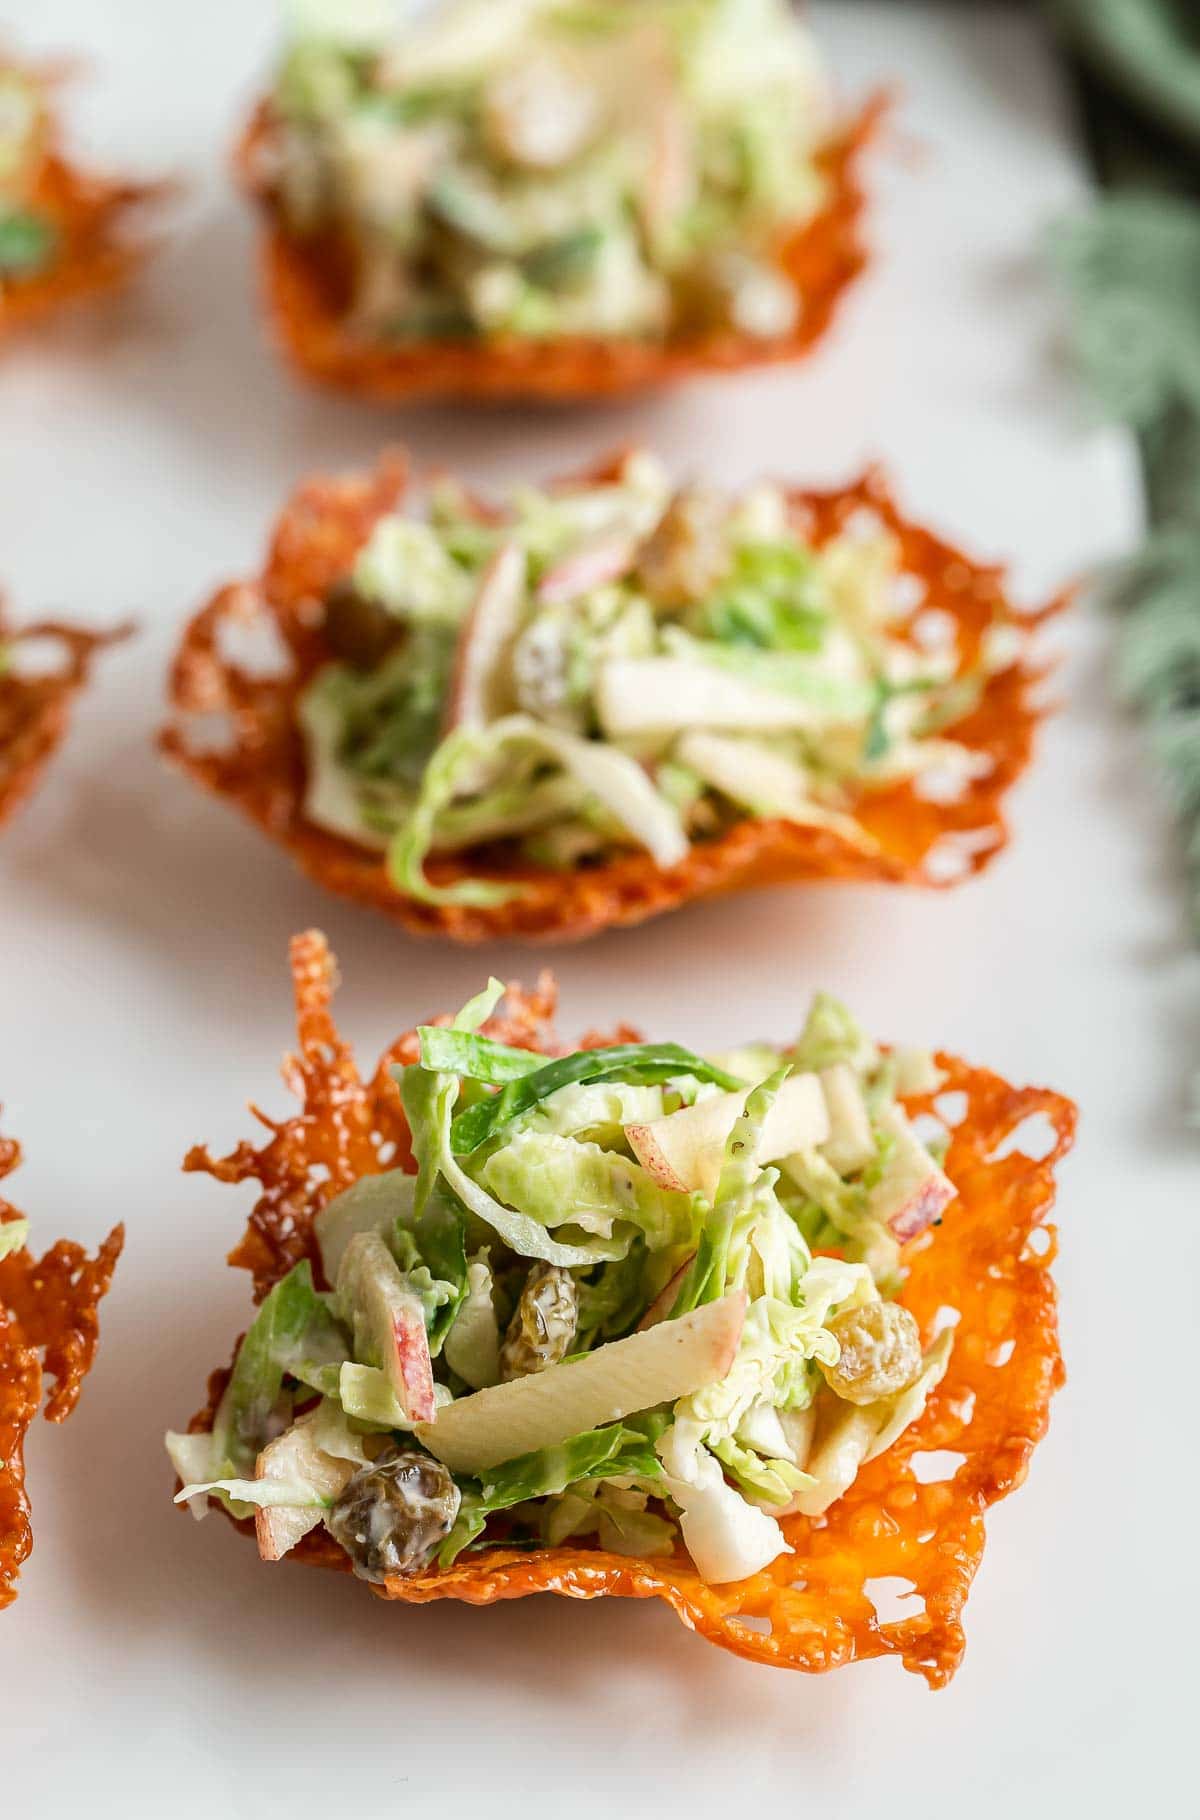 Brussels sprout slaw scooped into cheese cups.